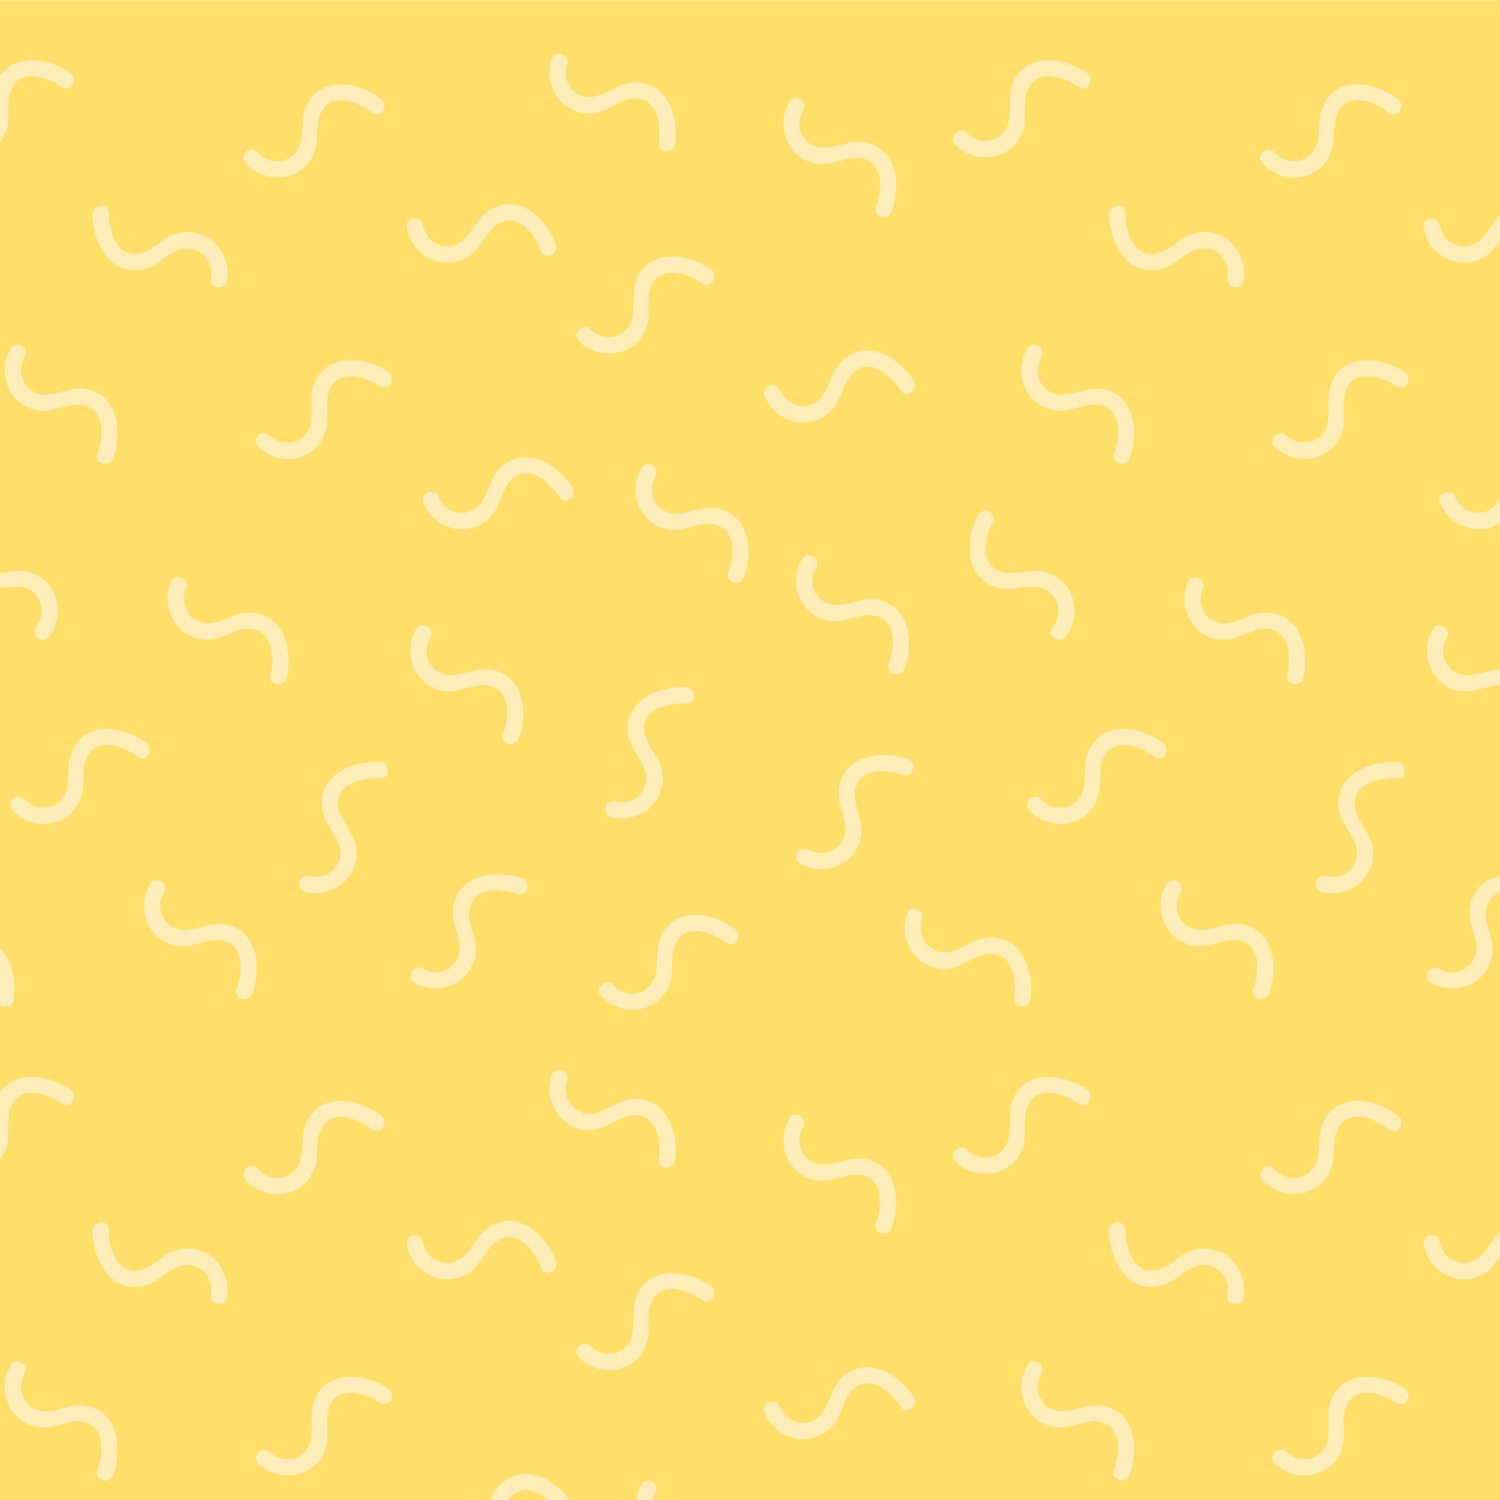 yellow background image with squiggles